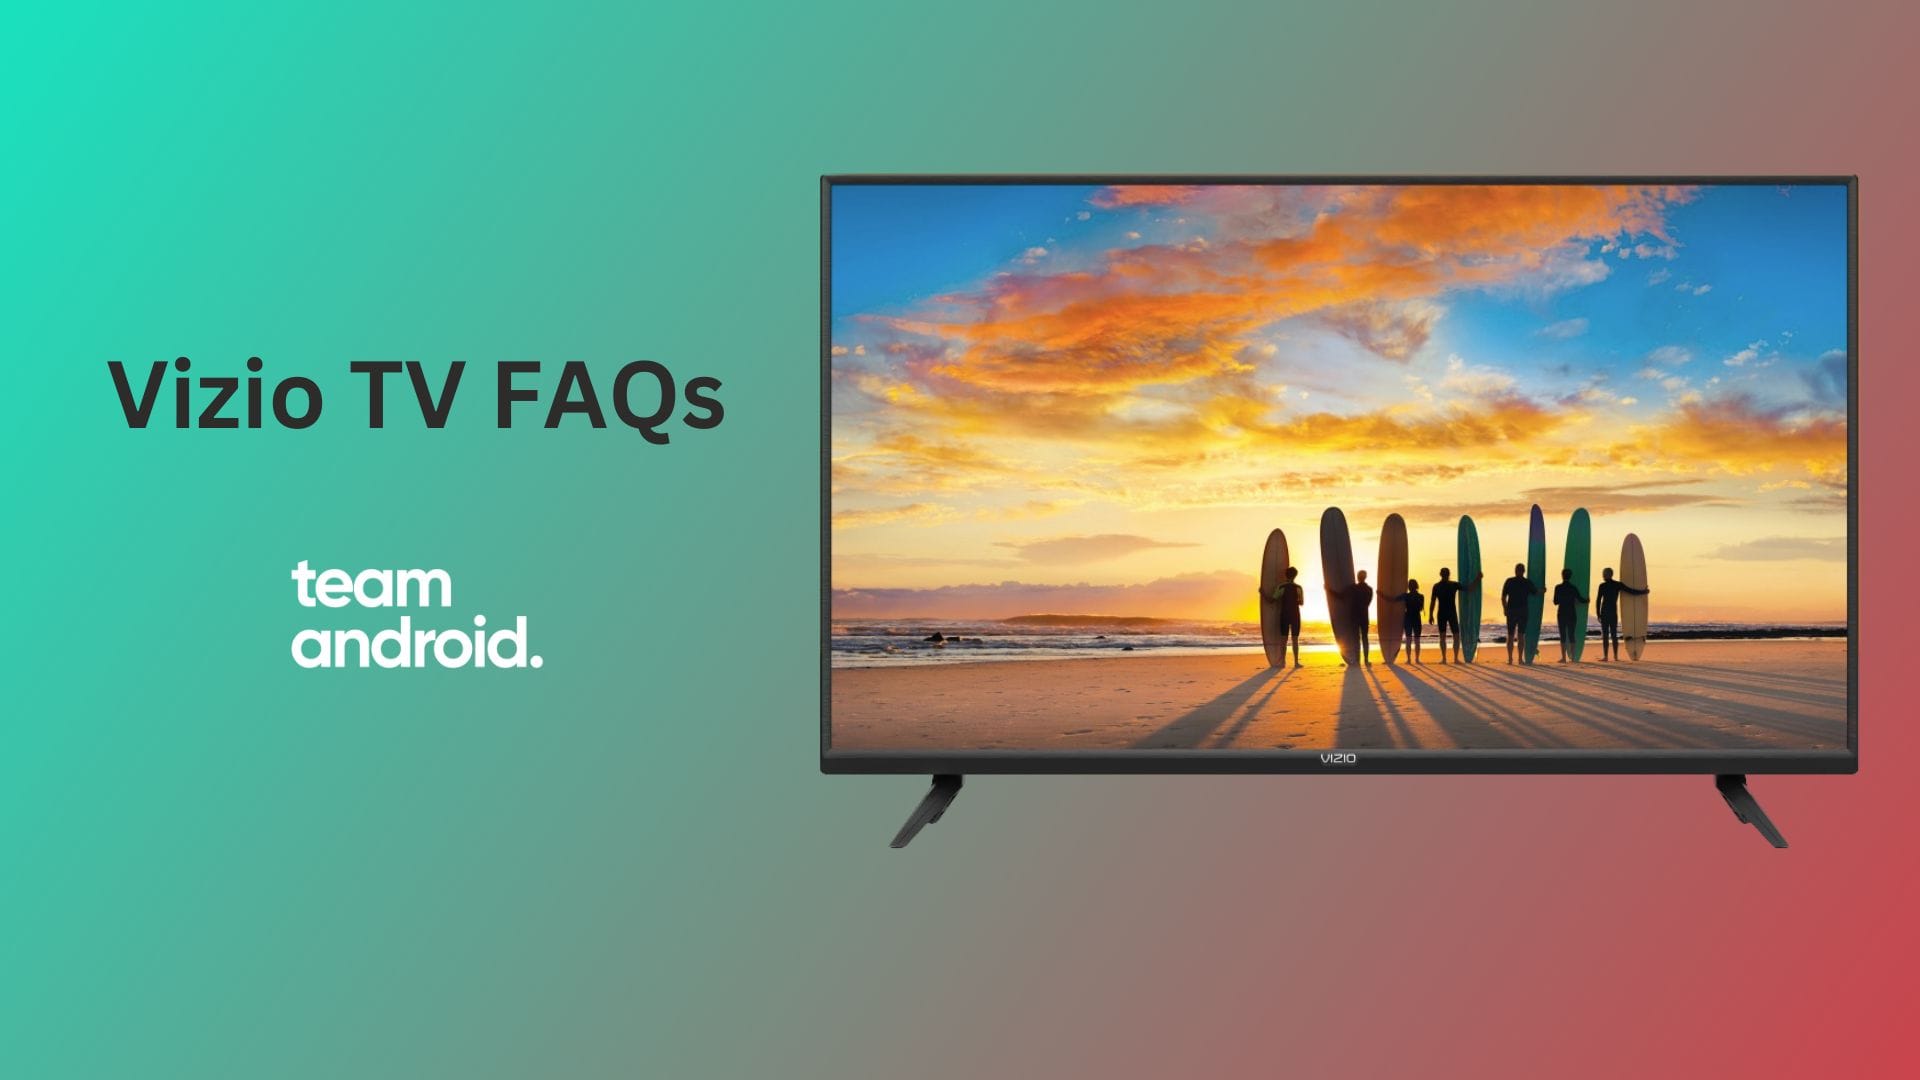 How to Turn Up Volume on Vizio TV without Remote - FAQs